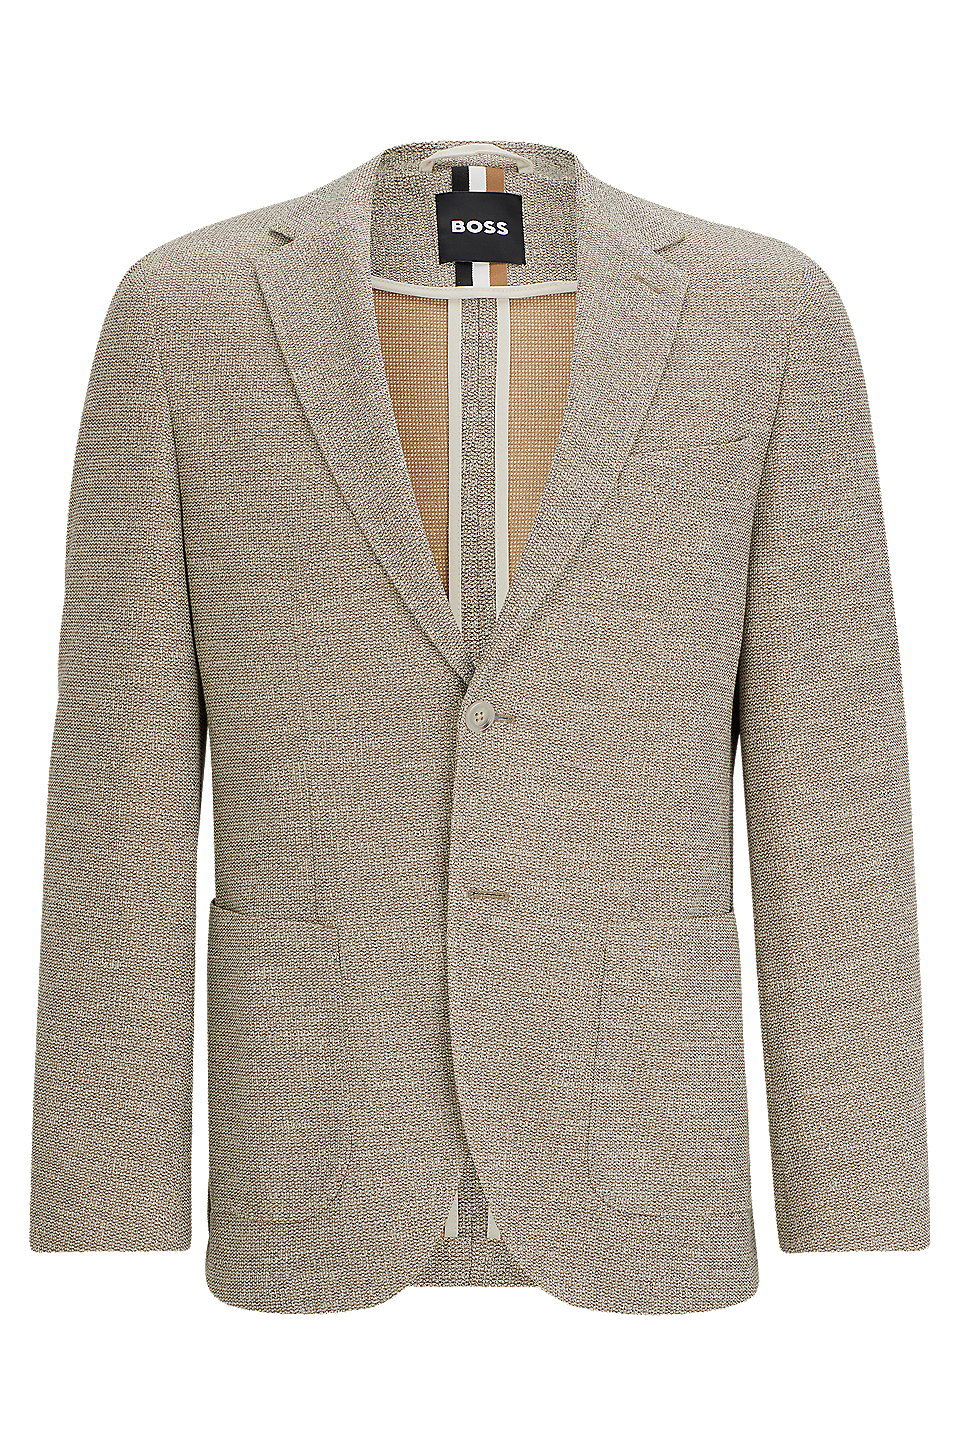 BOSS - Regular-fit jacket in micro-patterned stretch jersey